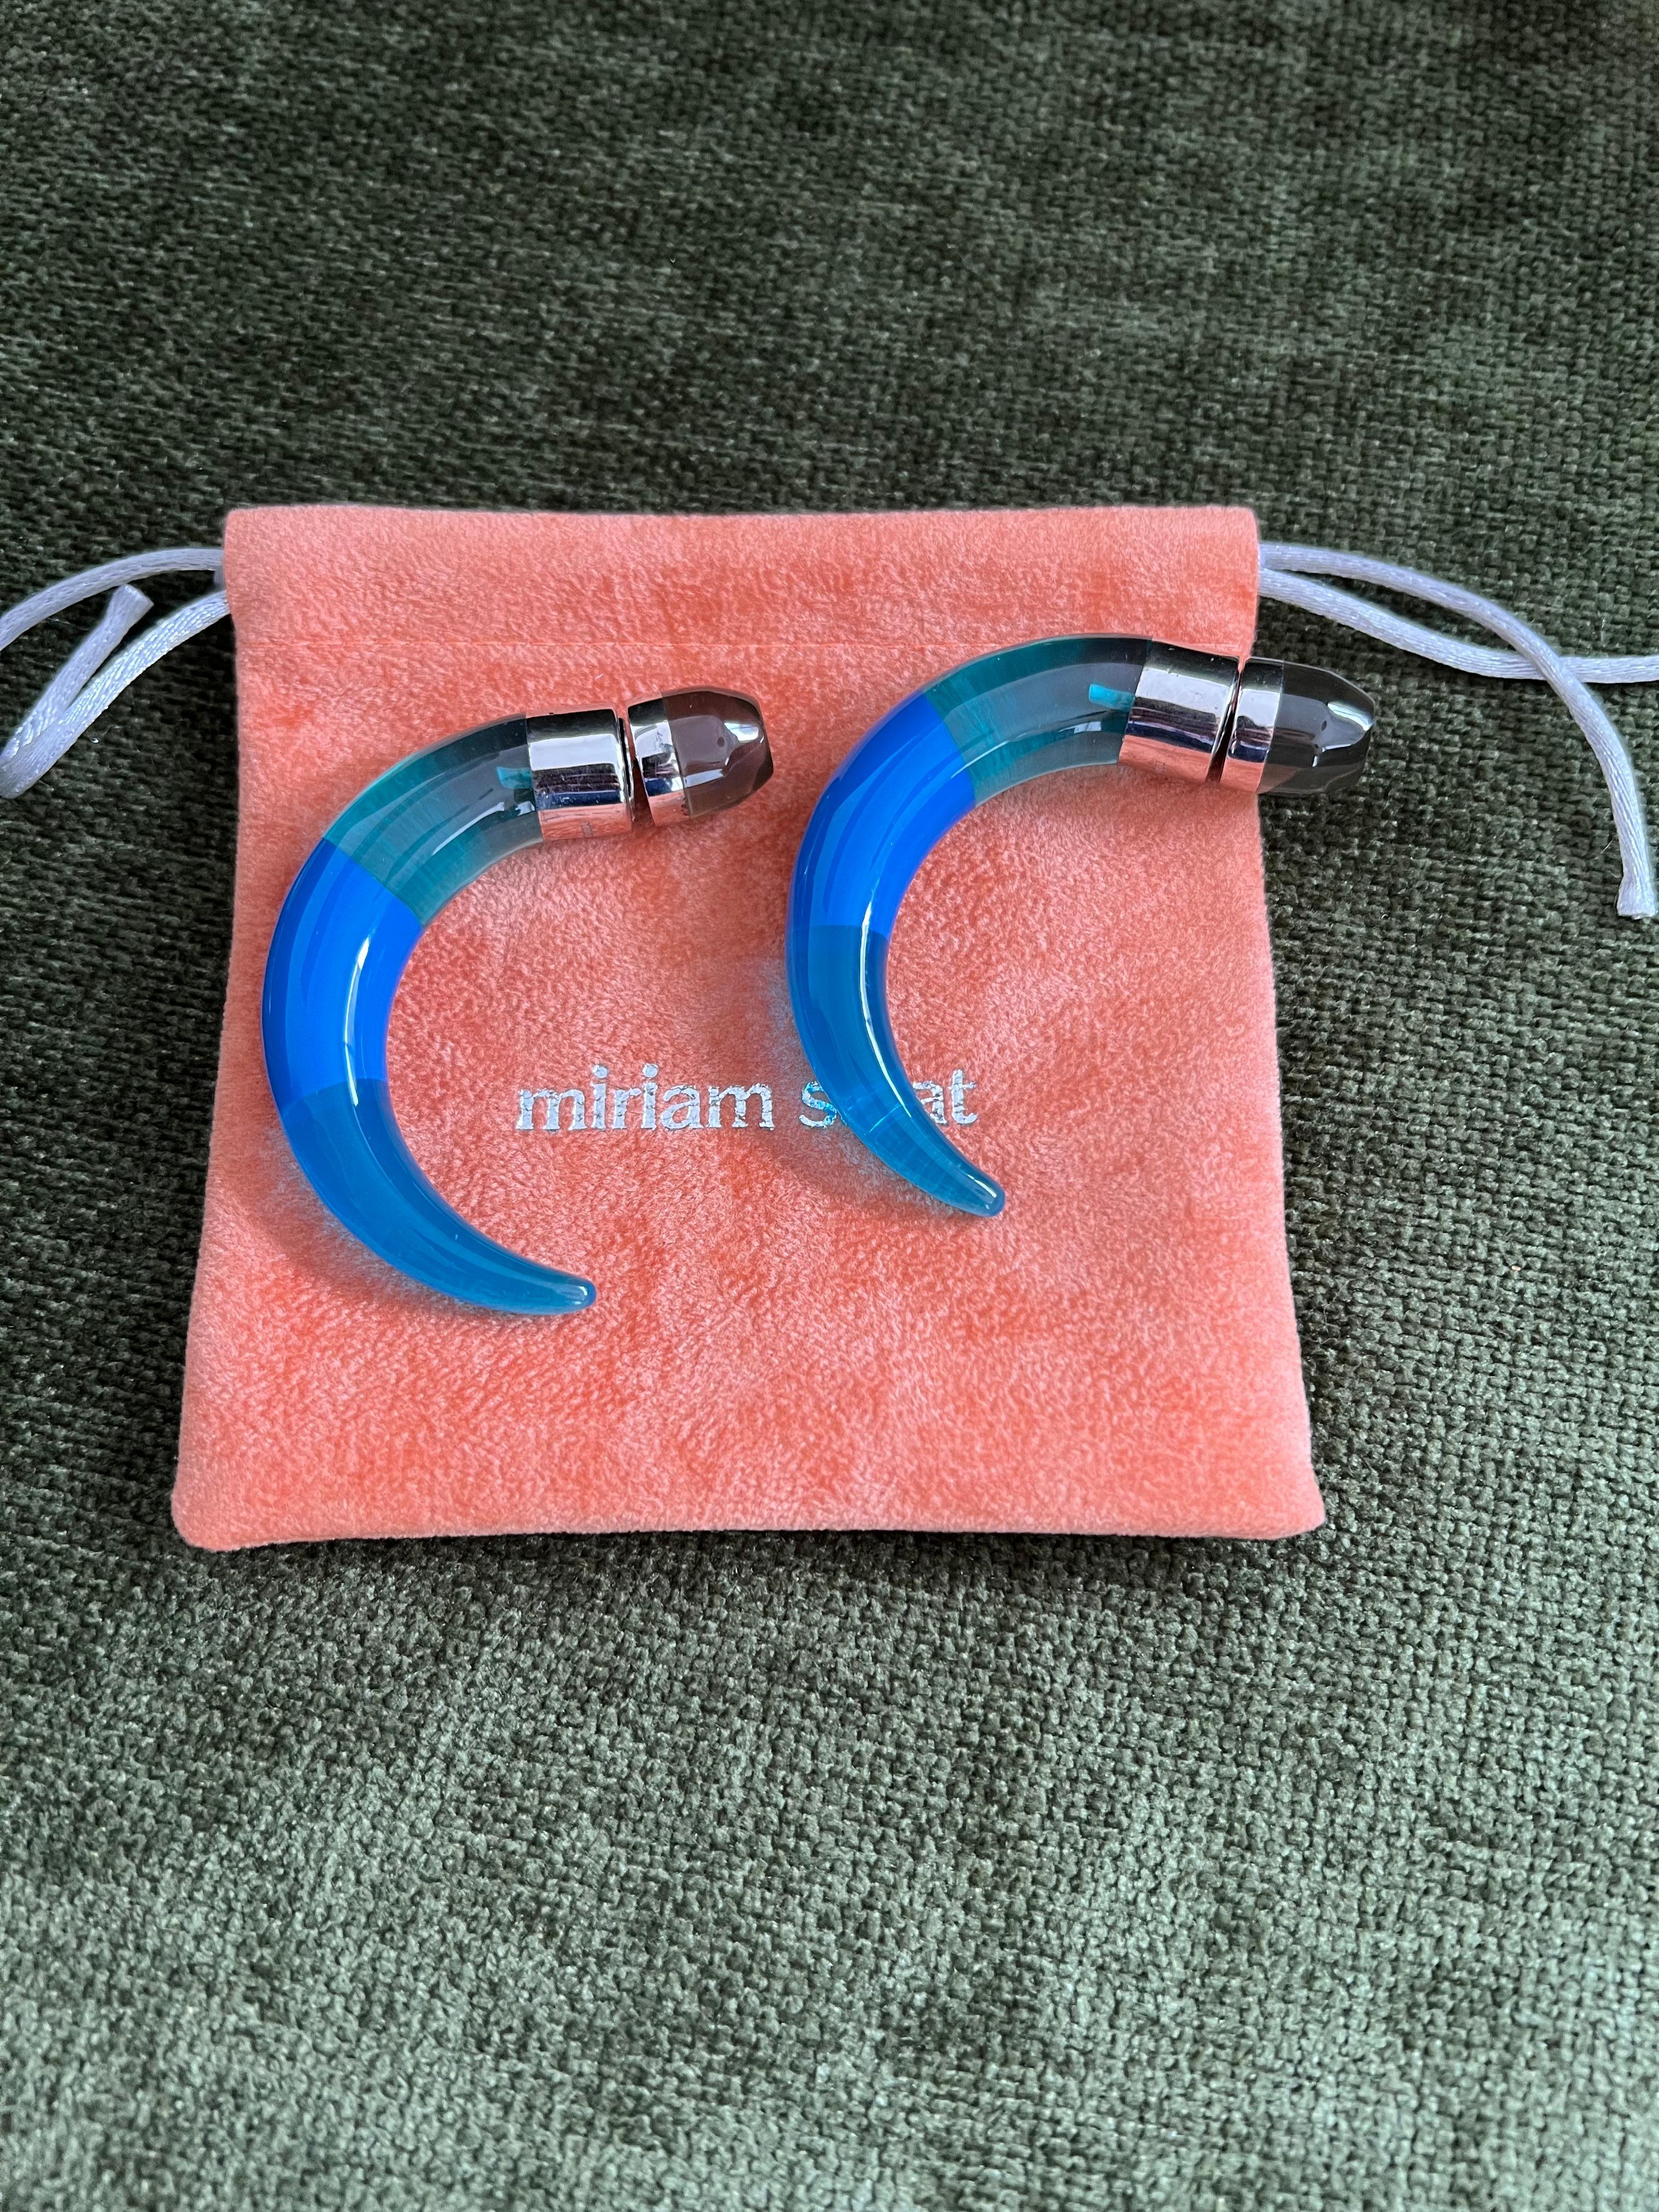 Fabulous Miriam Salat Translucent Tribal earrings, they are light and easy to wear. 
The clip on stud is also magnetic. 
Sterling silver. 
Translucent and opec resin. 
Signed MRM 750
Comes with a Miriam Salat Pouch. 